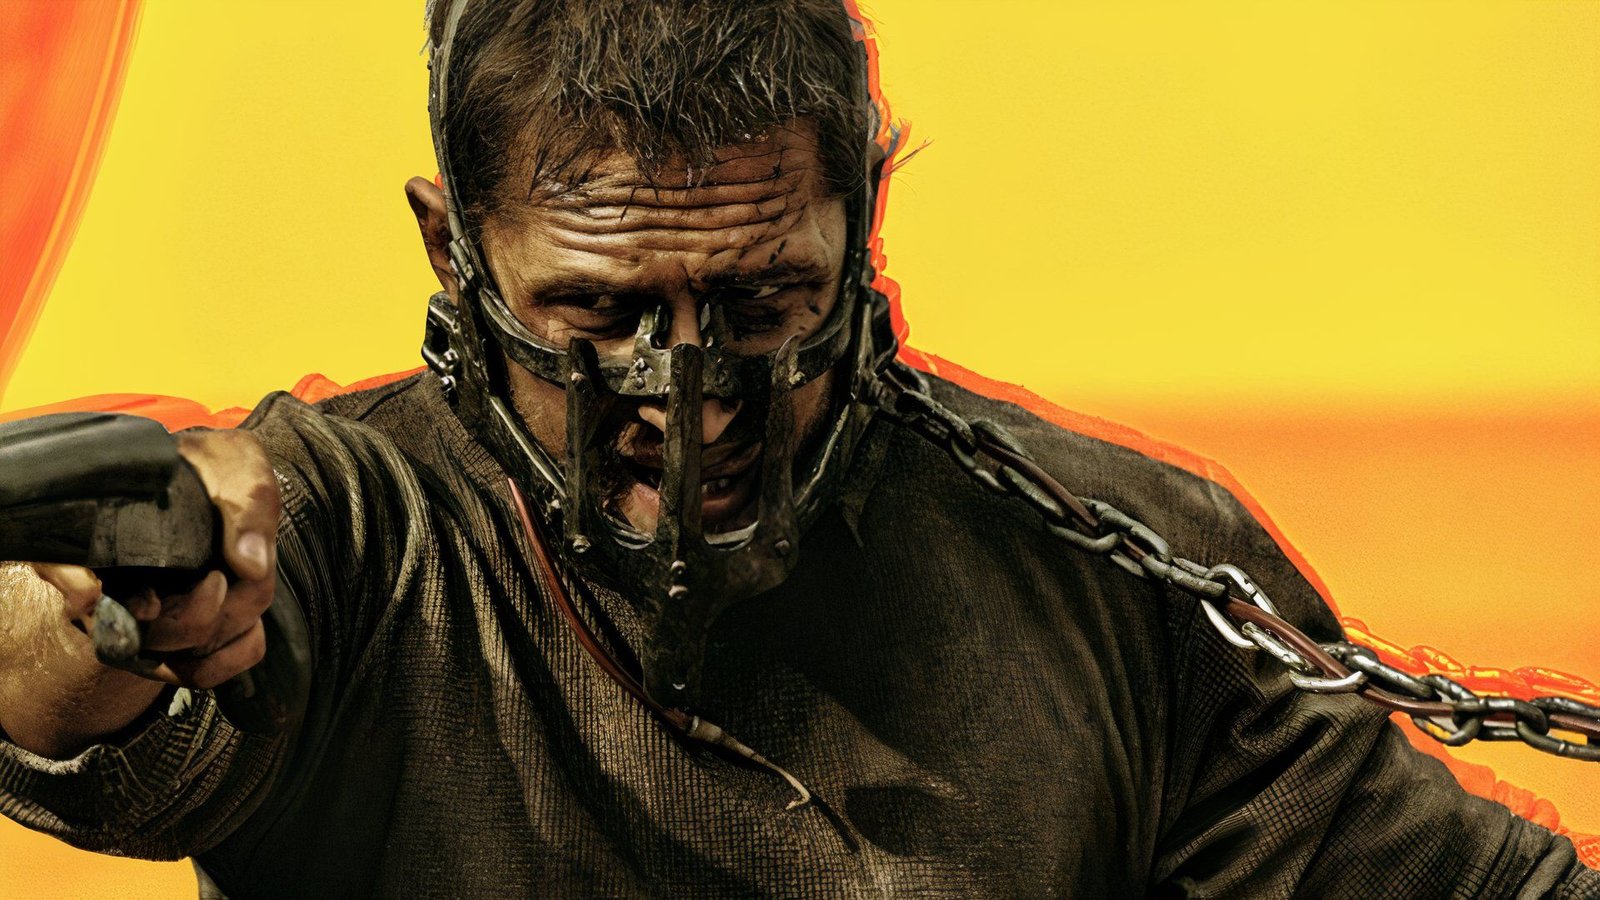 Furiosa Director Teases the Level of Action Planned for Mad Max: The Wasteland